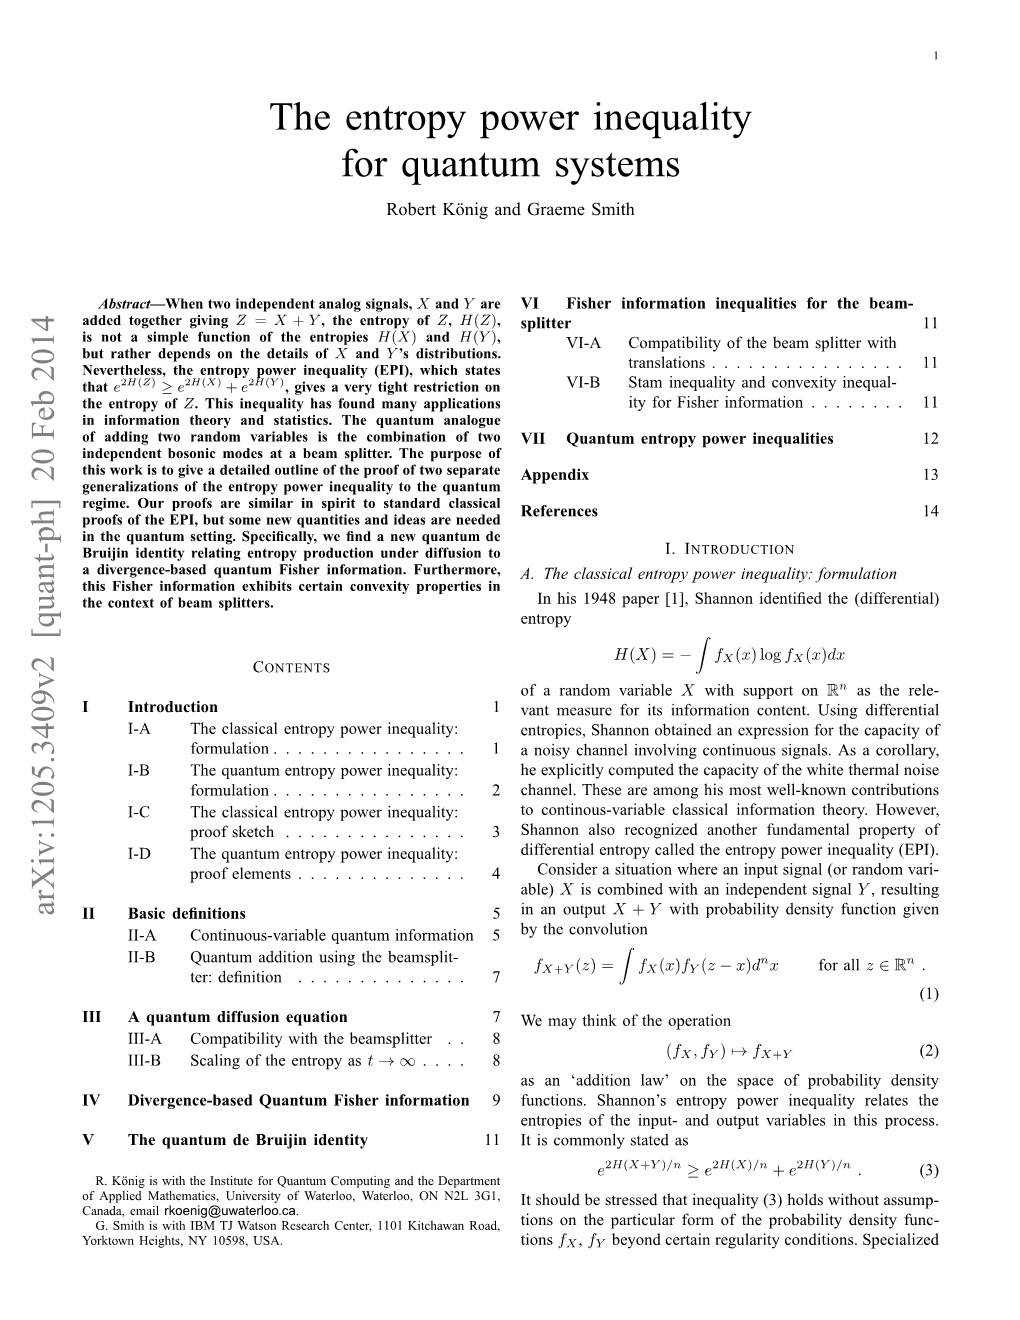 The Entropy Power Inequality for Quantum Systems